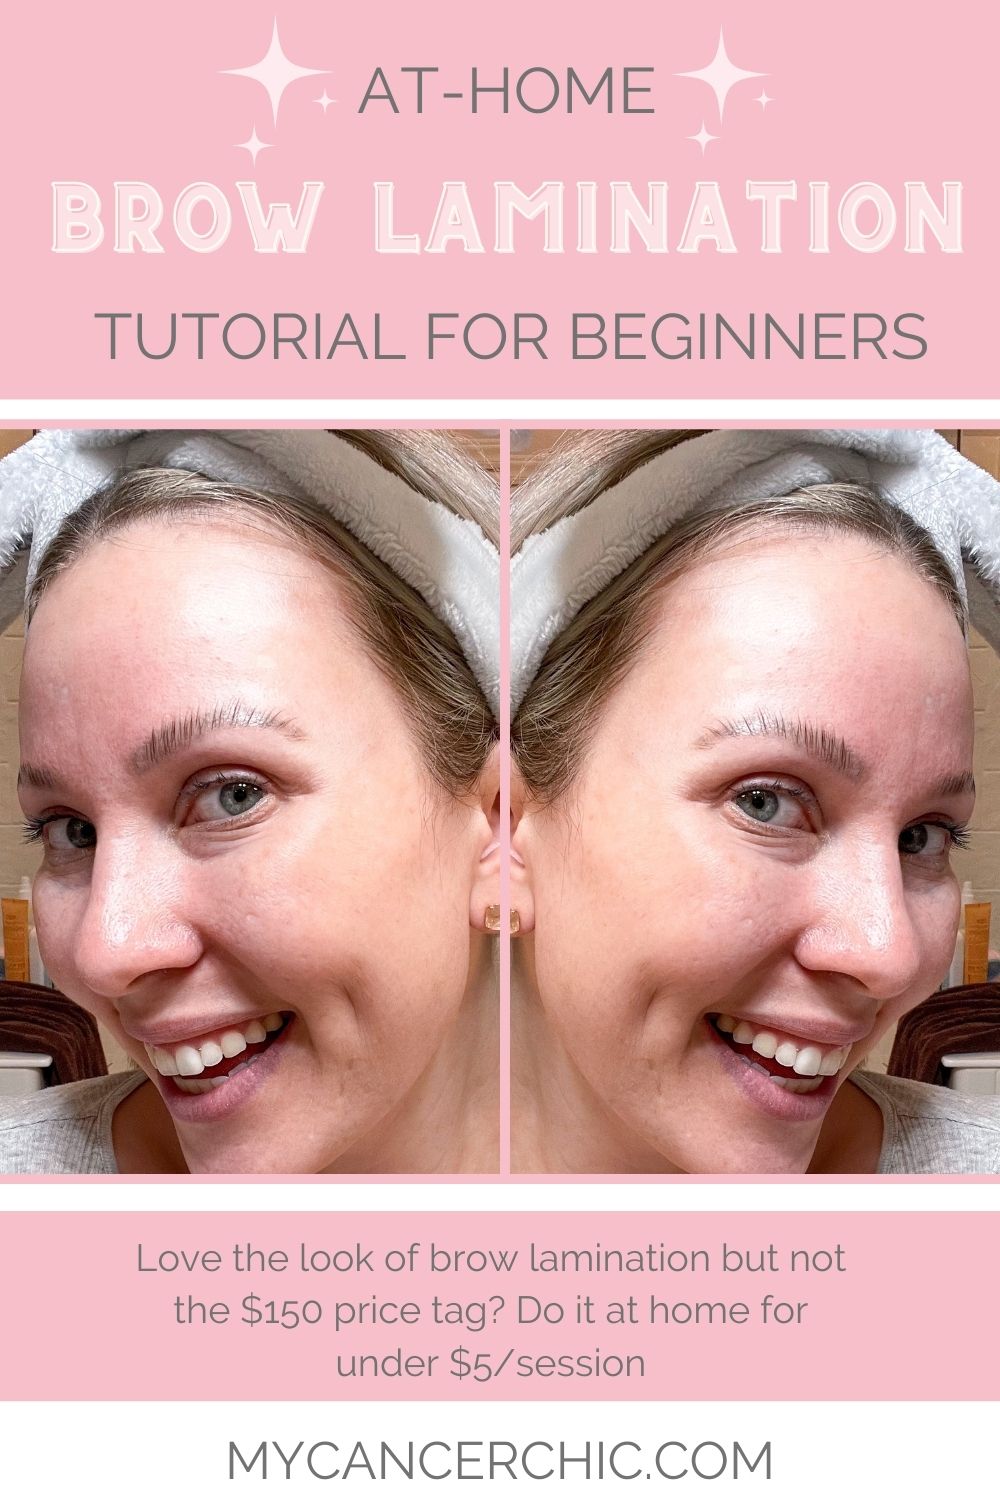 How to Achieve Amazing Brow Lamination Results at Home